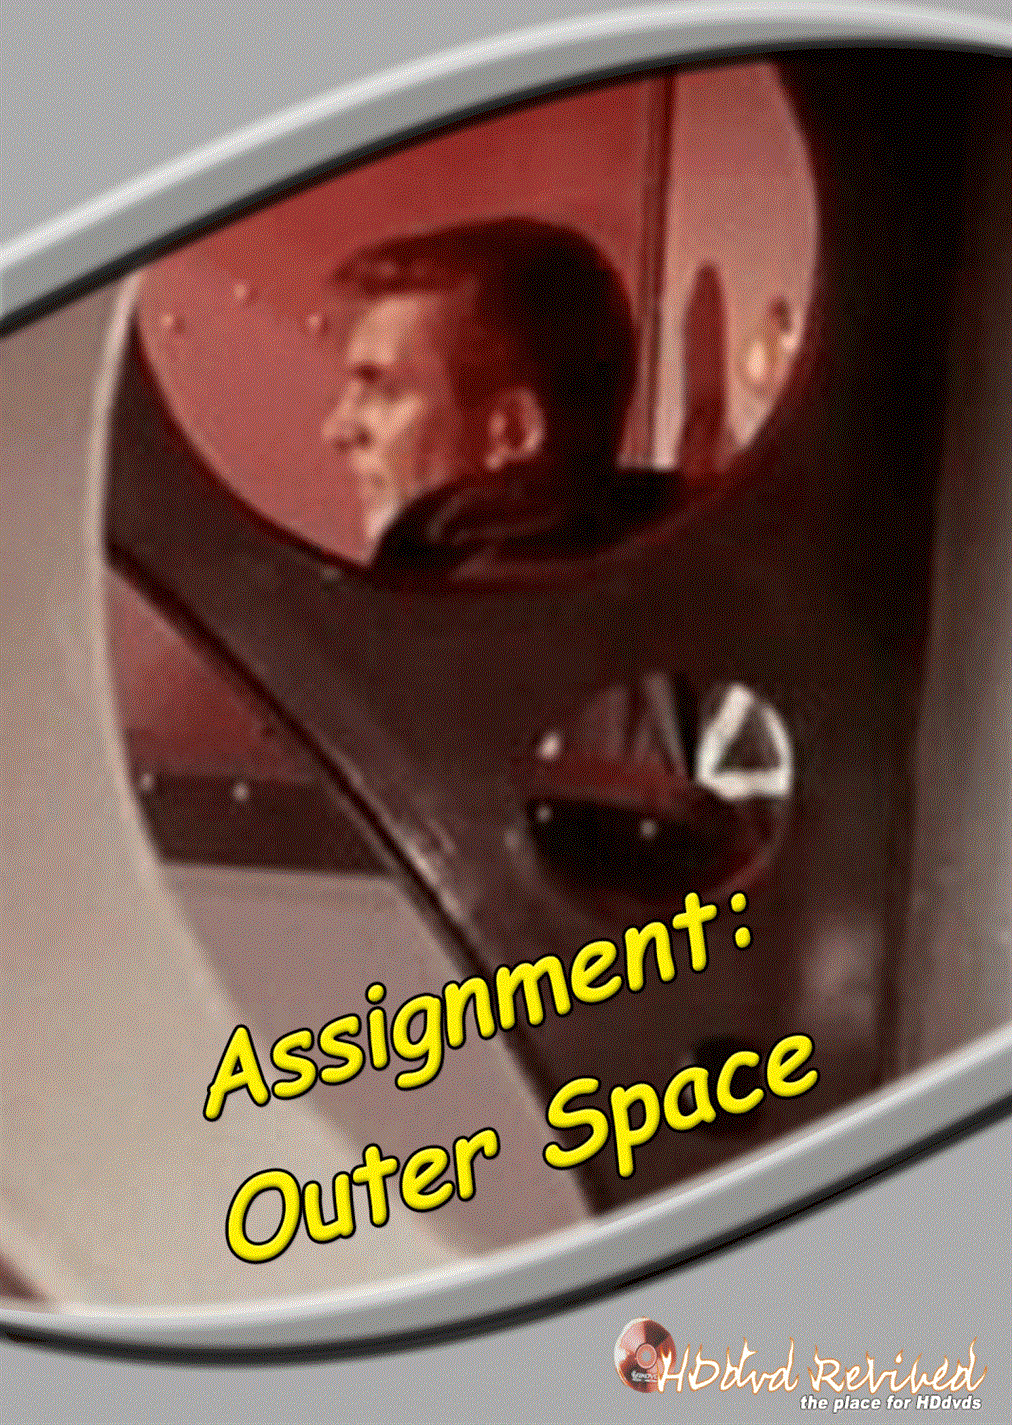 Assignment Outer Space (1960) Standard DVD (HDDVD-Revived) UK Seller